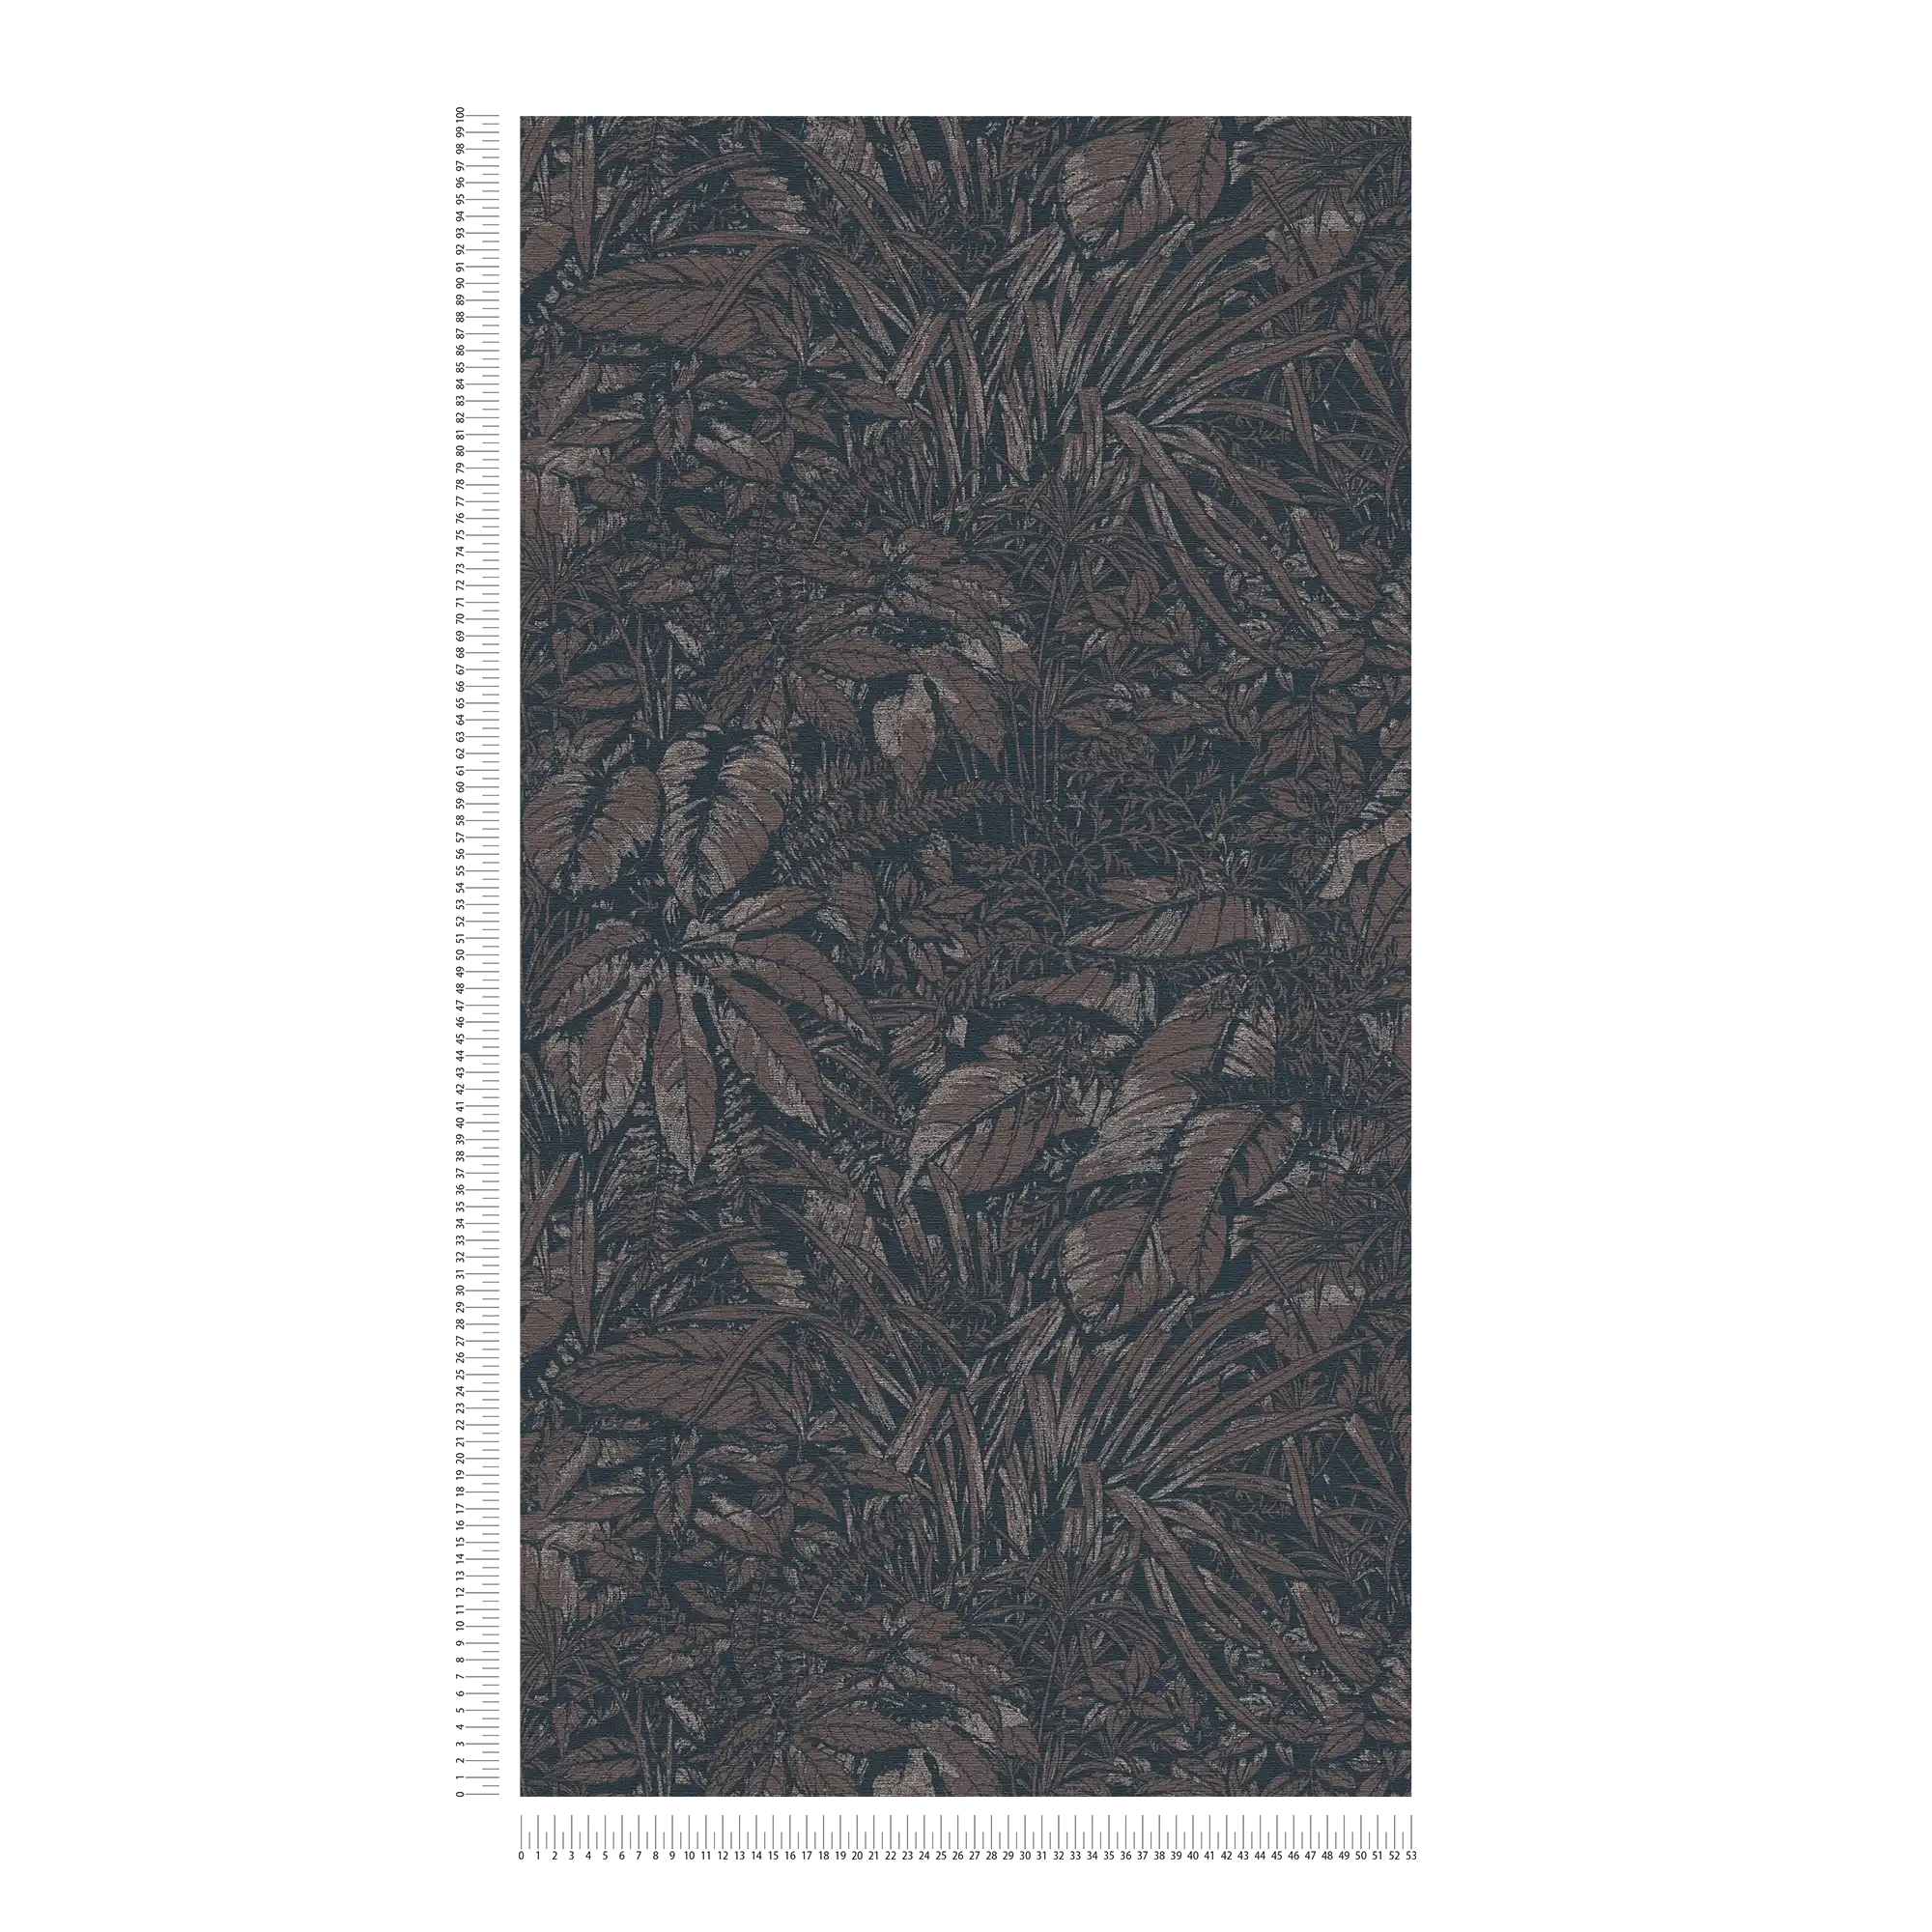             Jungle wallpaper light glossy with leaf pattern - brown, black, silver
        